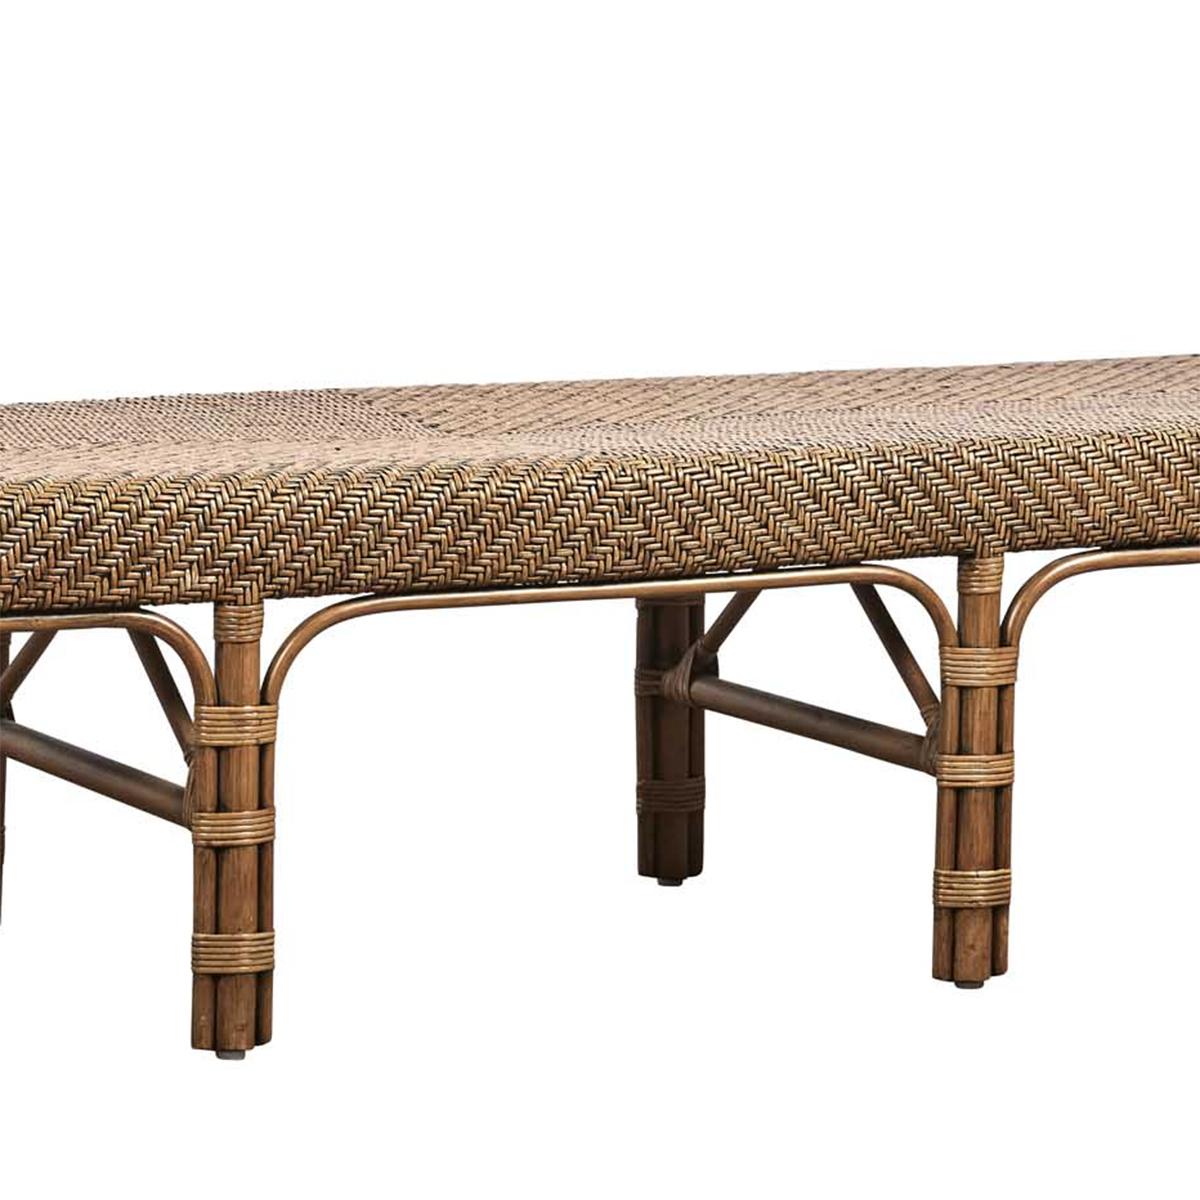 French Roda Rattan Bench For Sale